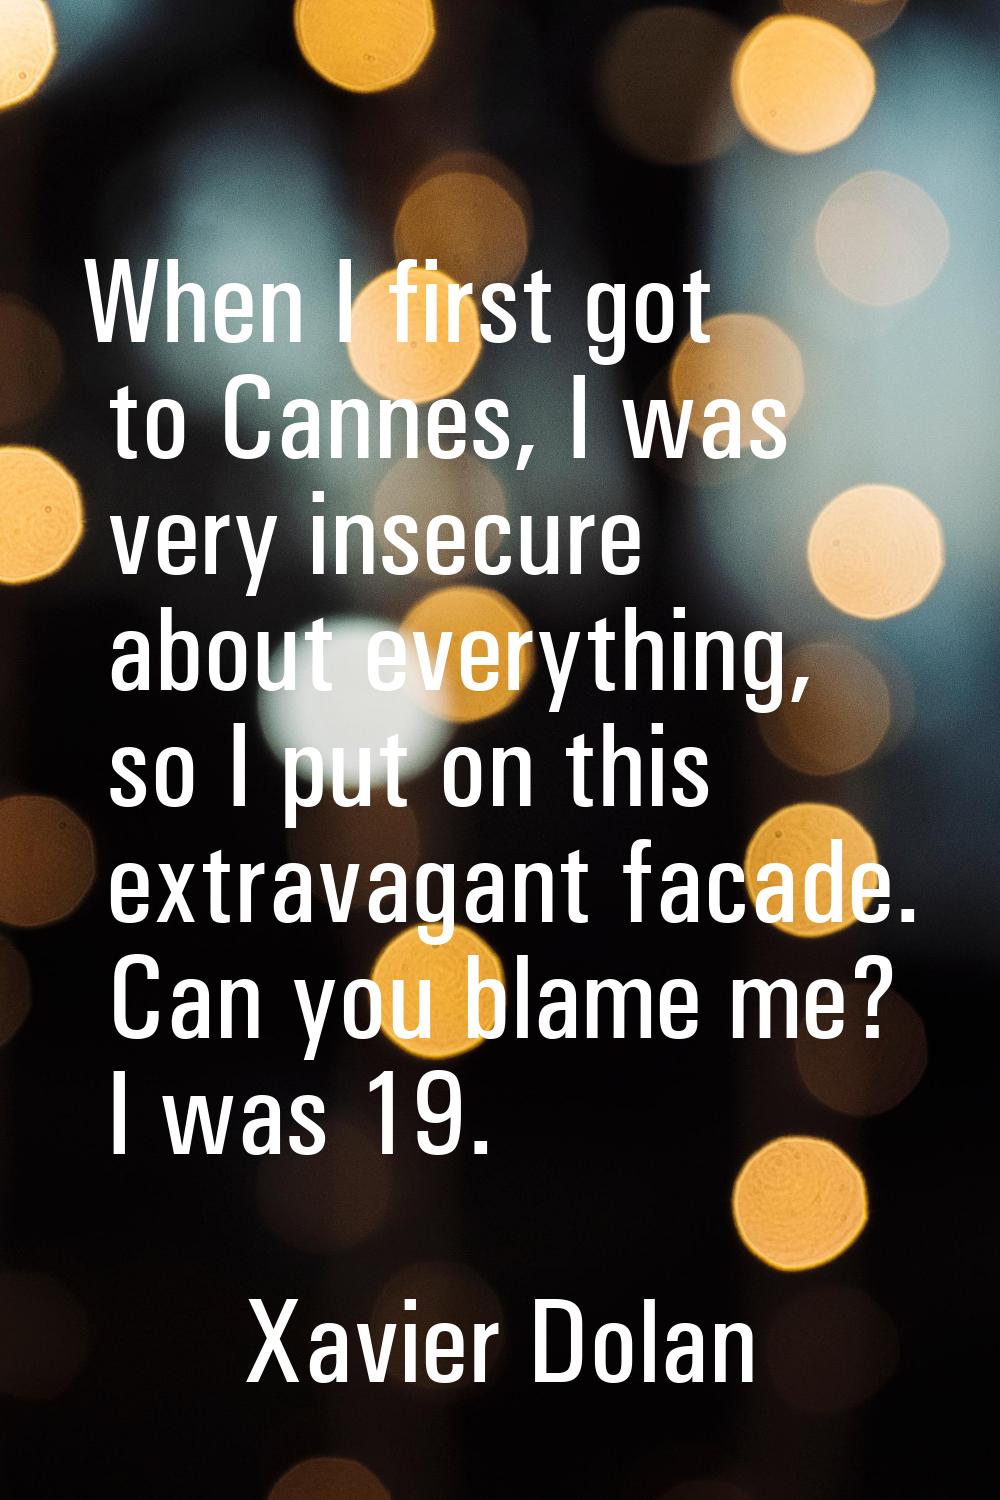 When I first got to Cannes, I was very insecure about everything, so I put on this extravagant faca